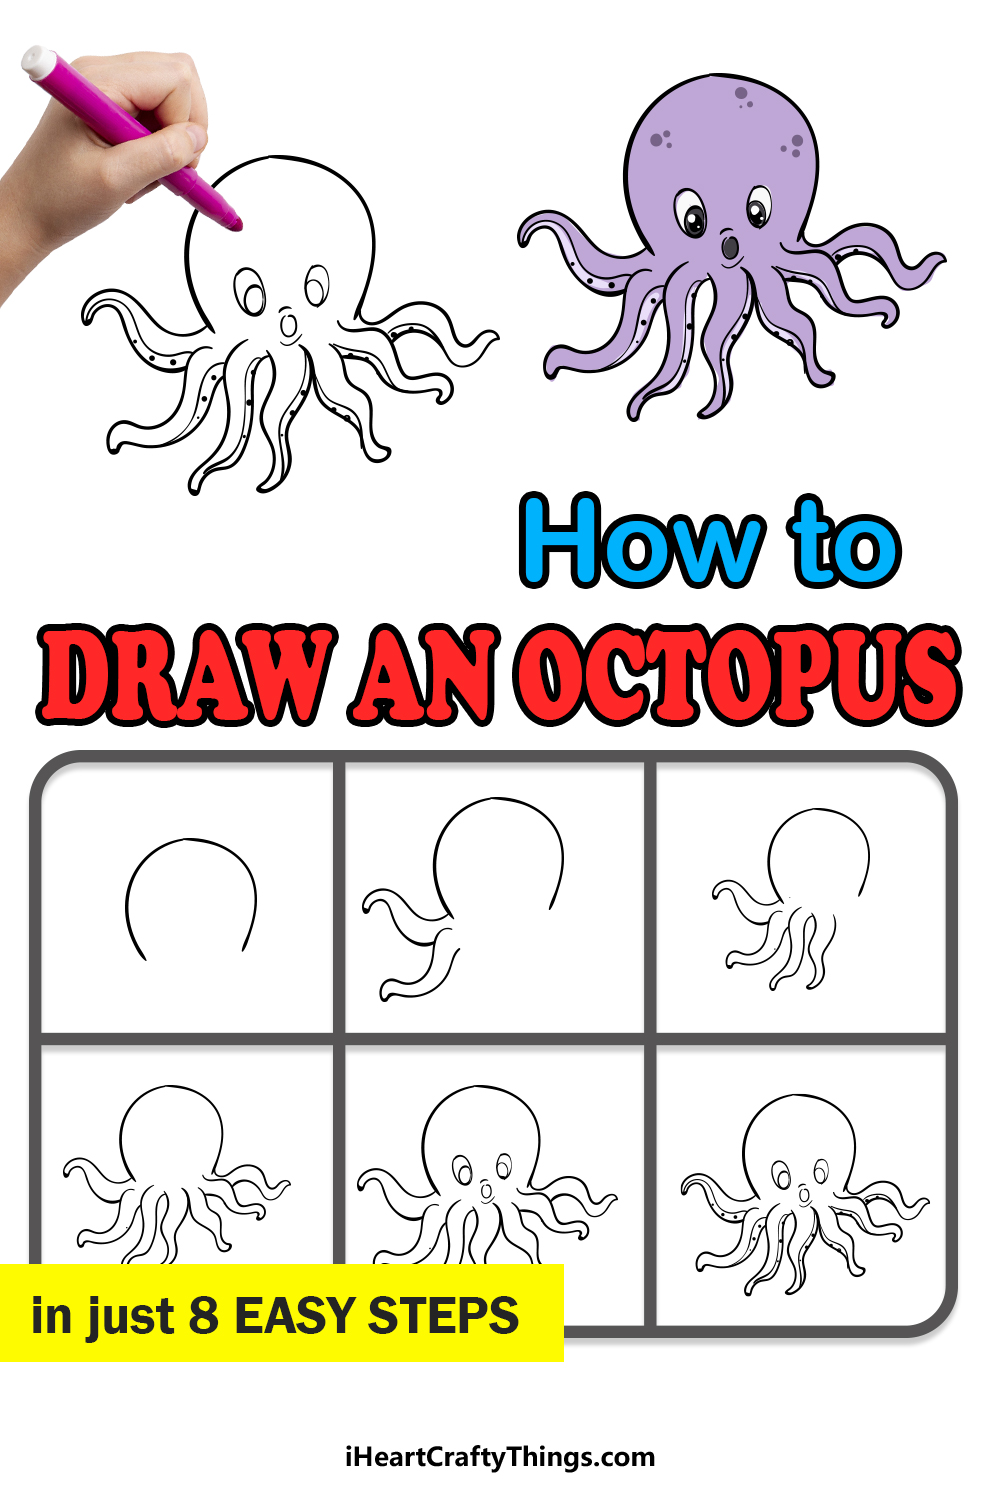 how to draw an octopus in 8 easy steps